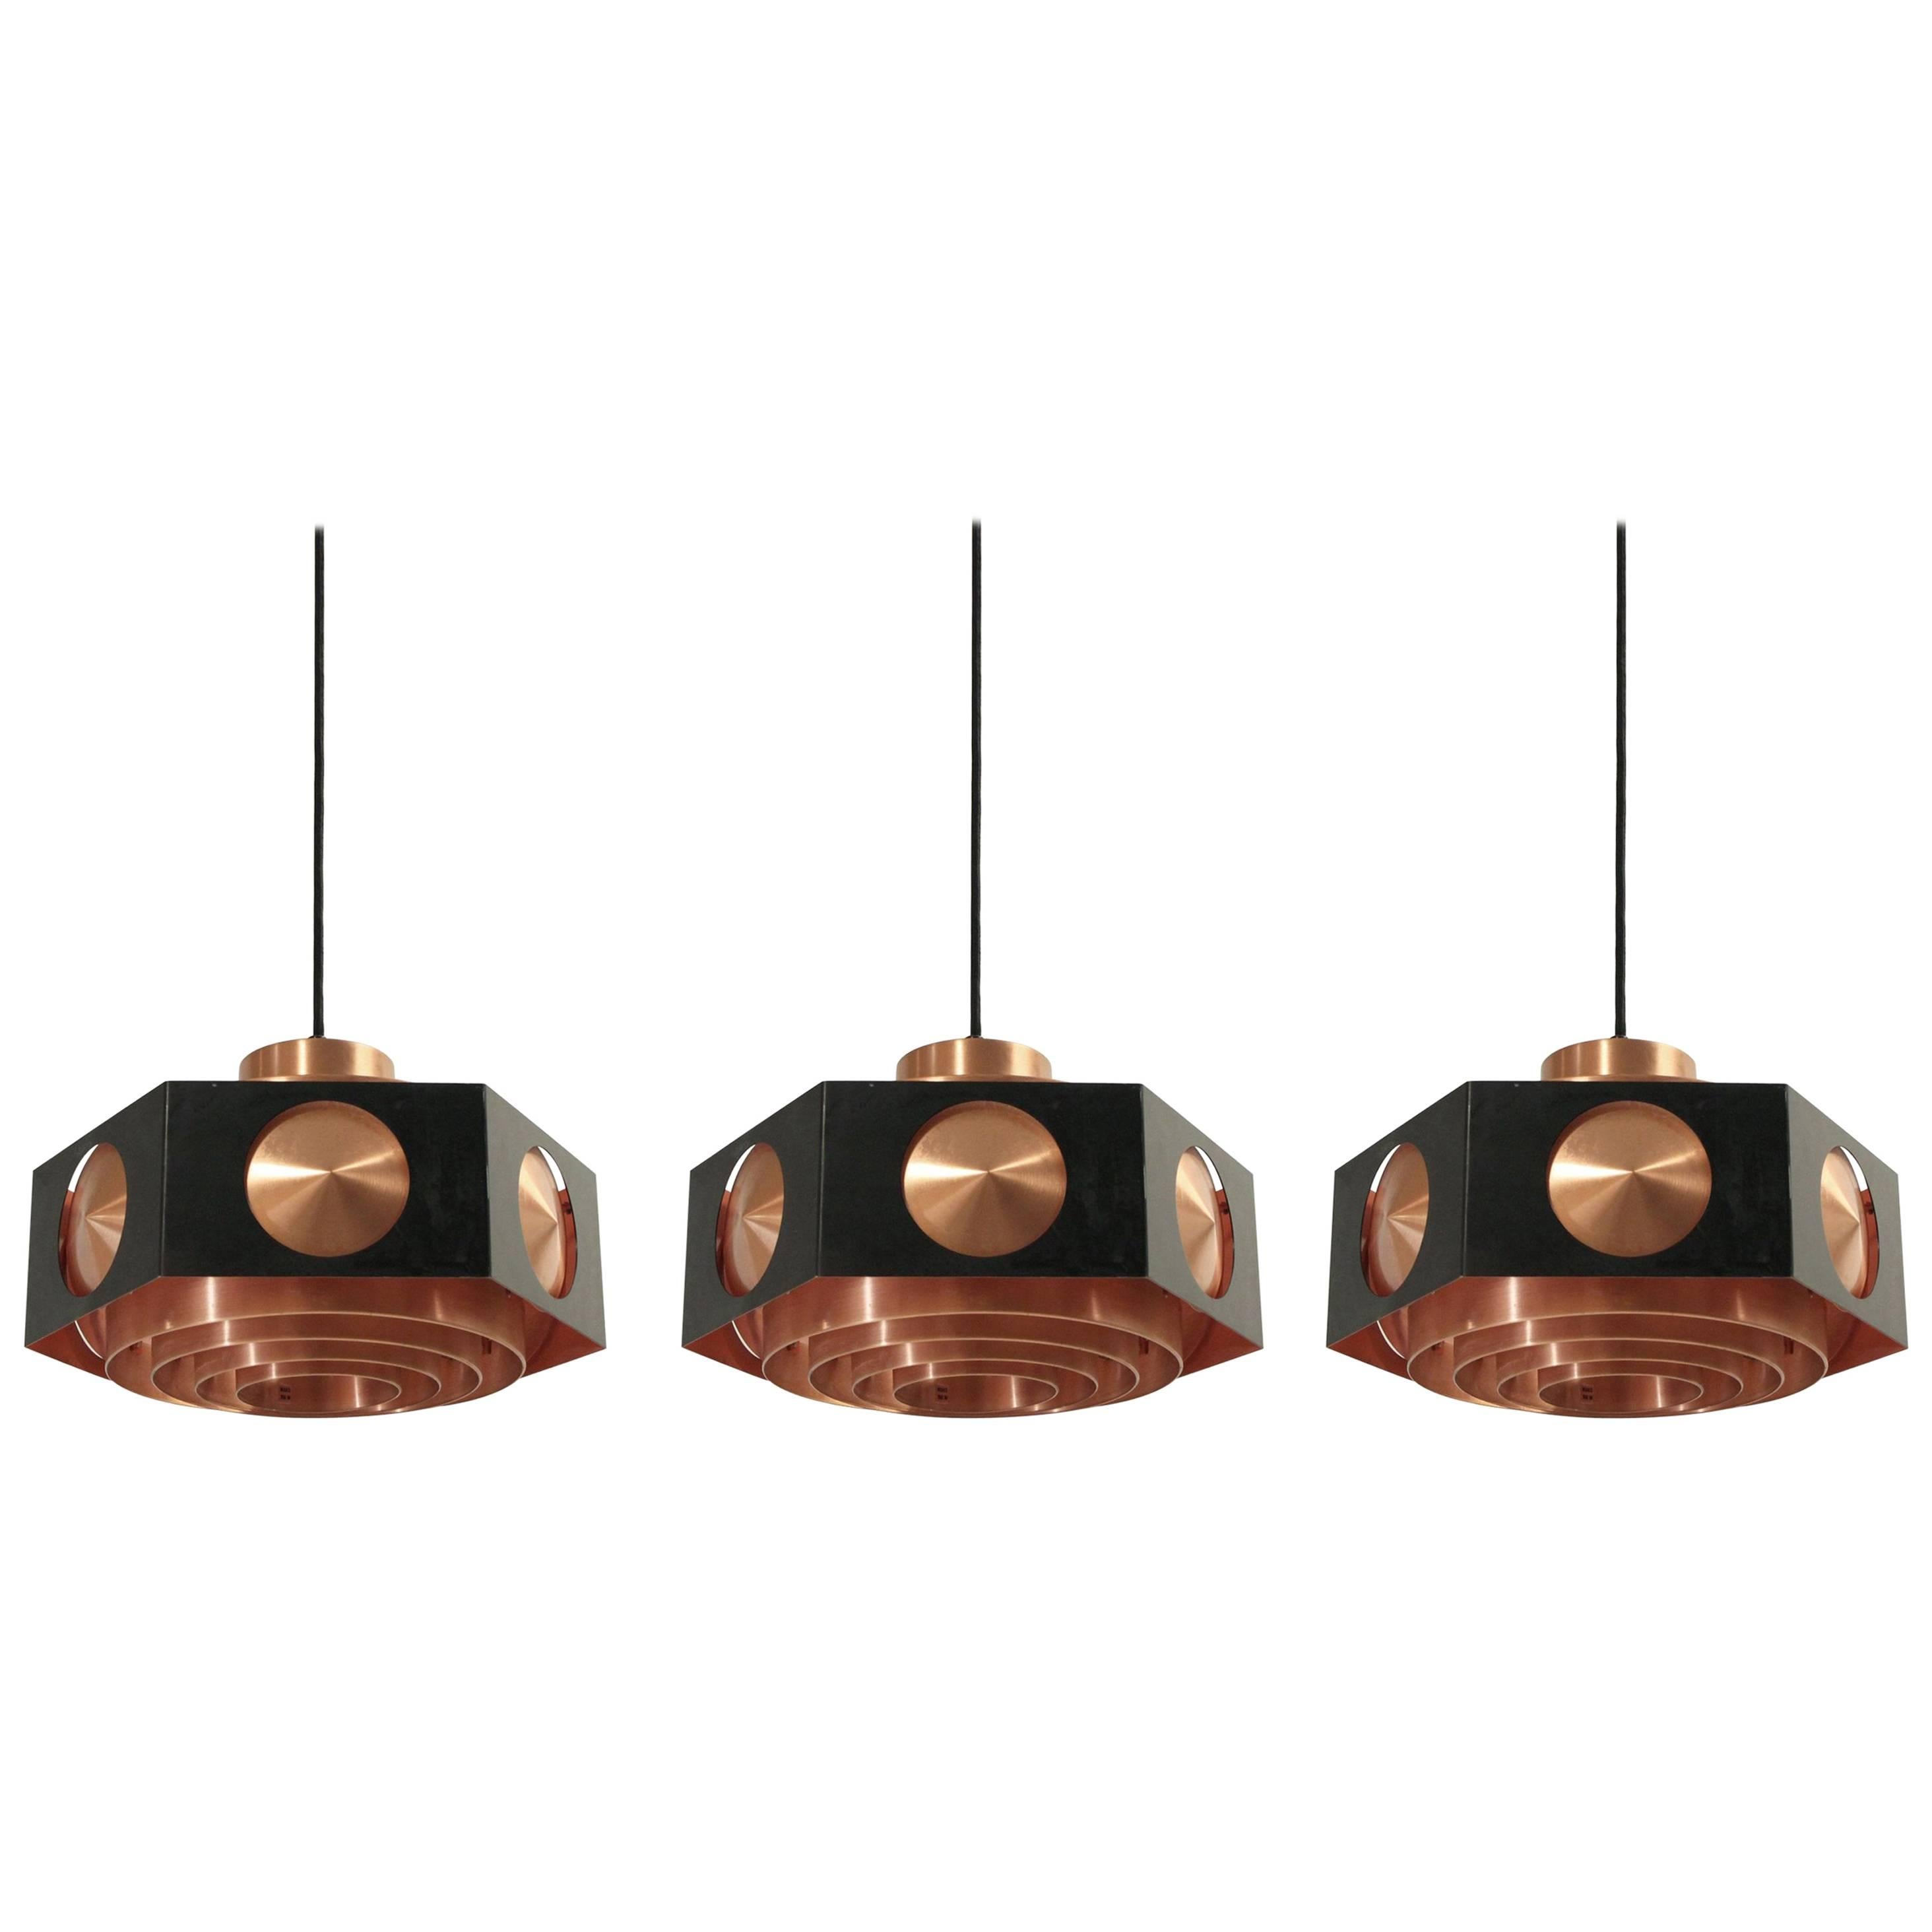 Set of Three Scandinavian Ceiling Lights by TR & Co, Norway, 1960s